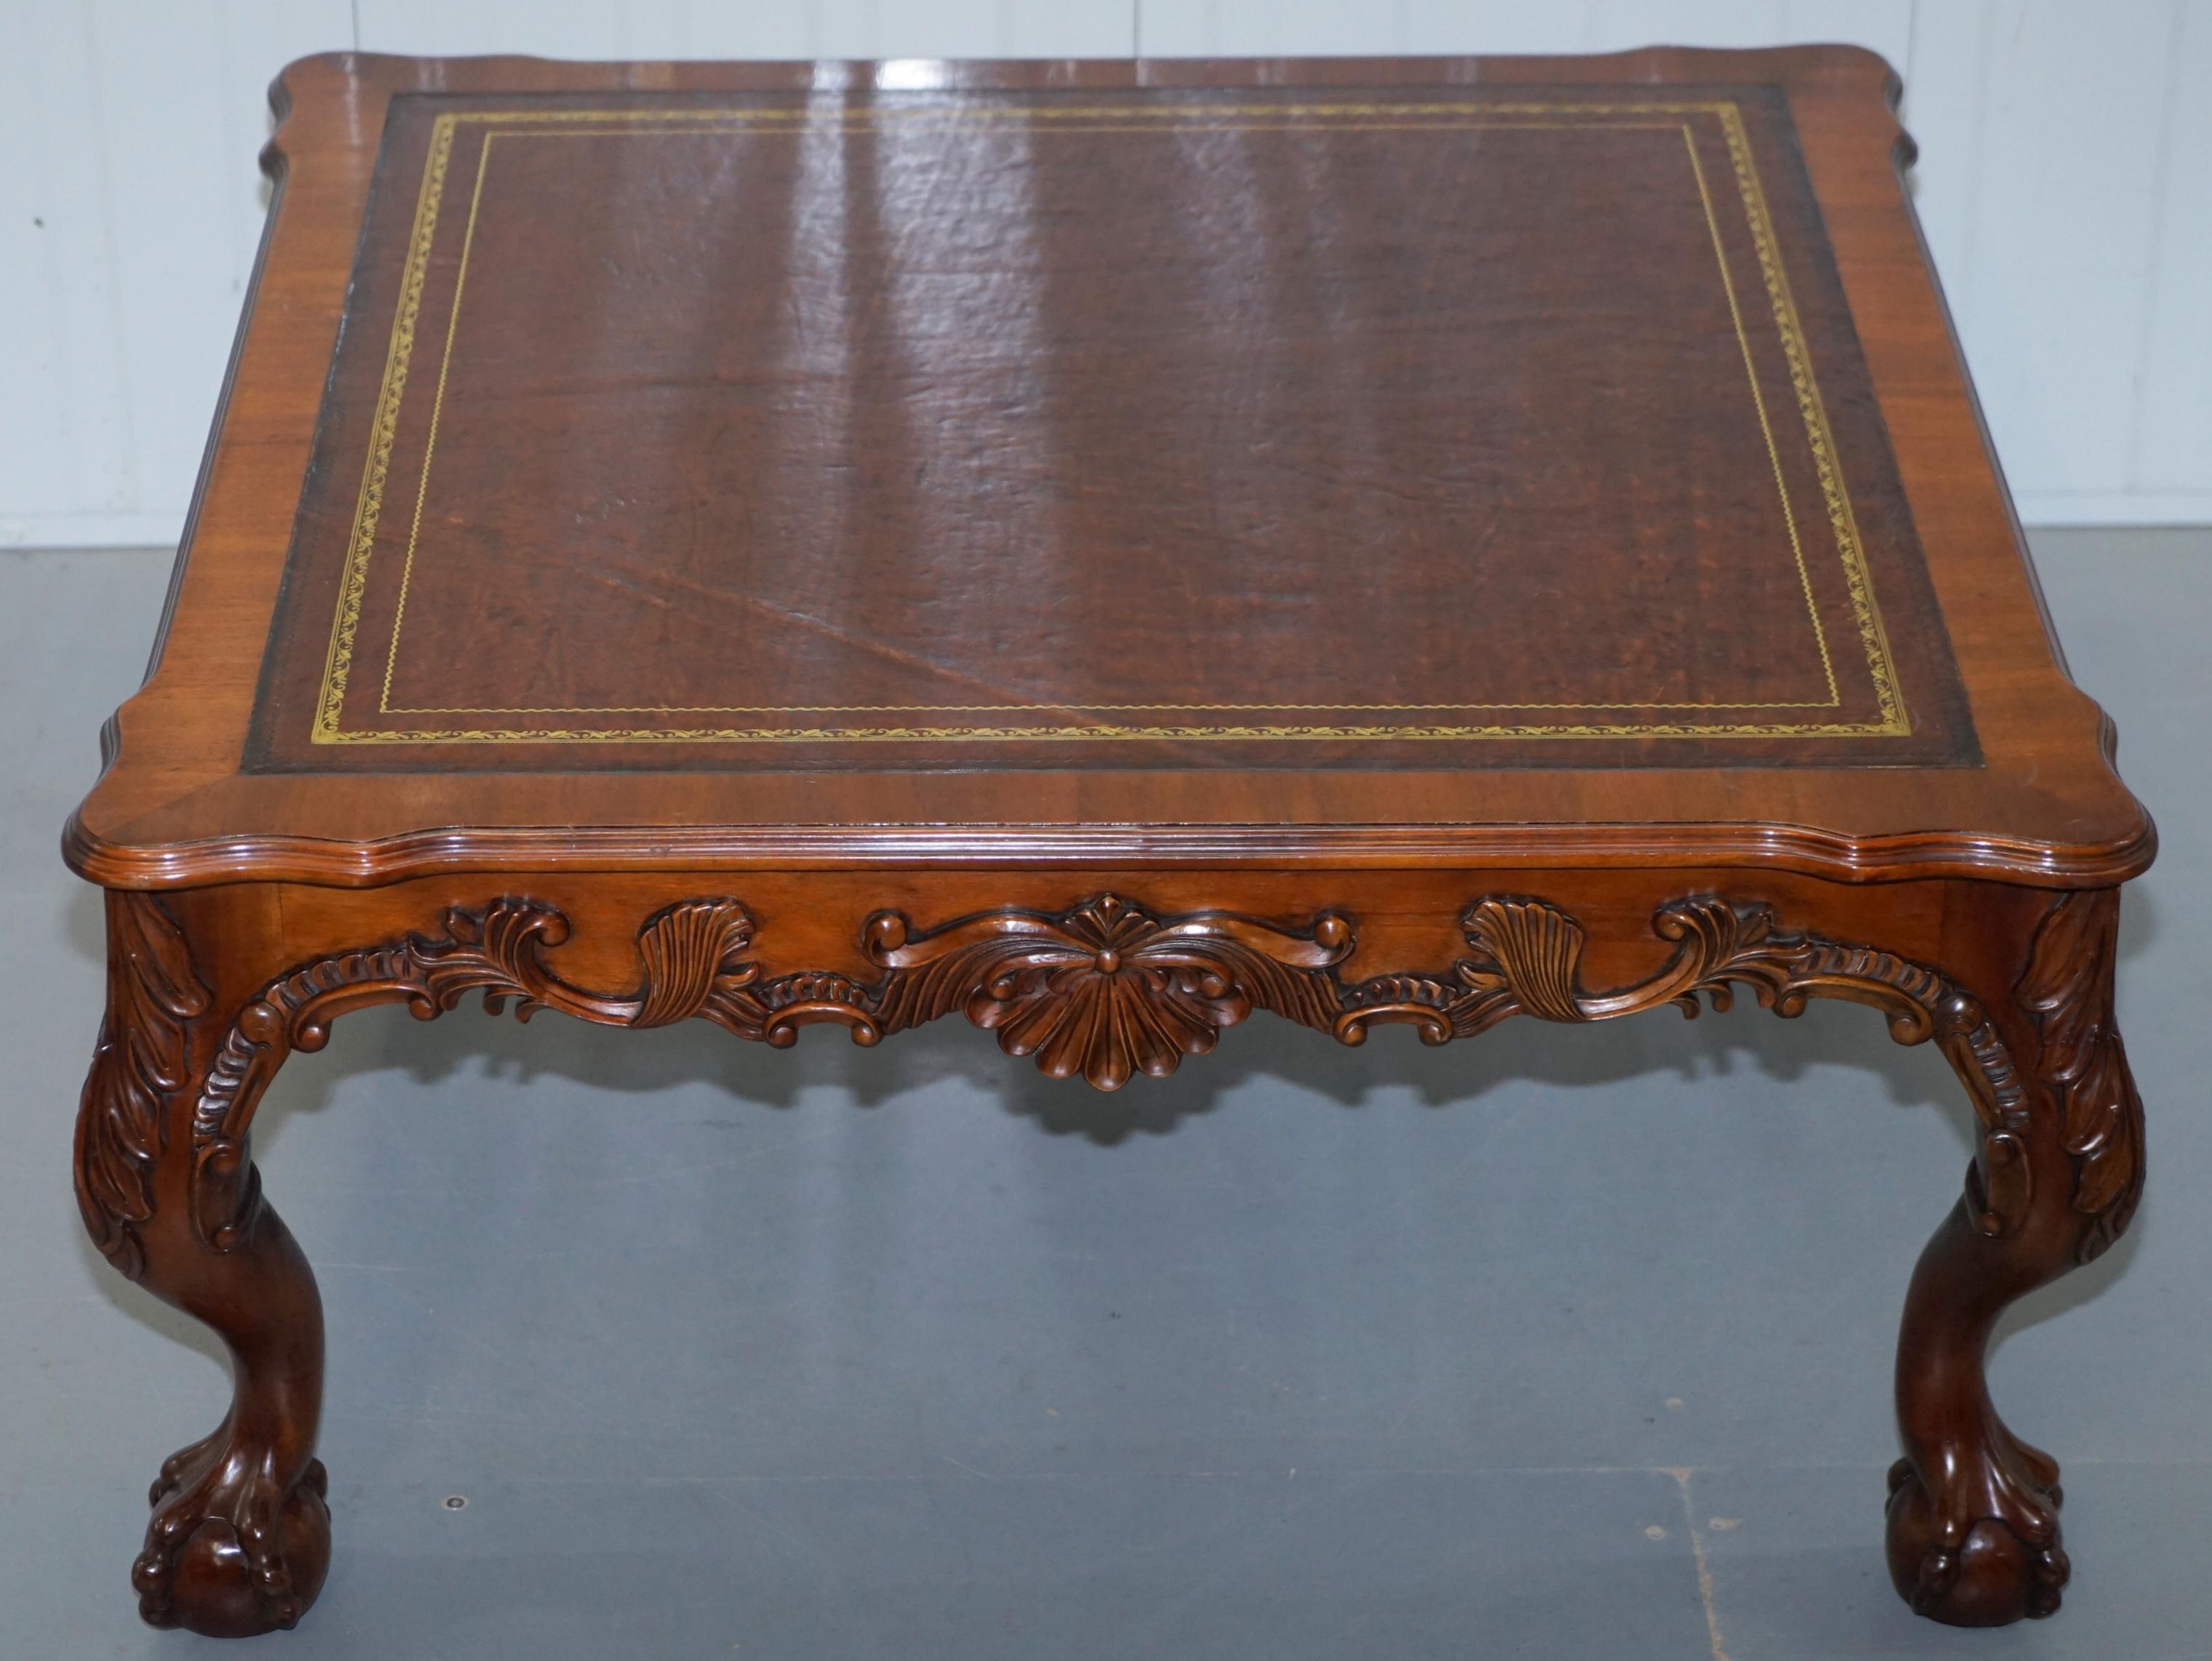 We are delighted to offer for sale this stunning hand-carved Claw & Ball foot on cabriolet legs coffee table with brown leather top

This table is made from solid mahogany and is ornately carved all over in the Thomas Chippendale style. The